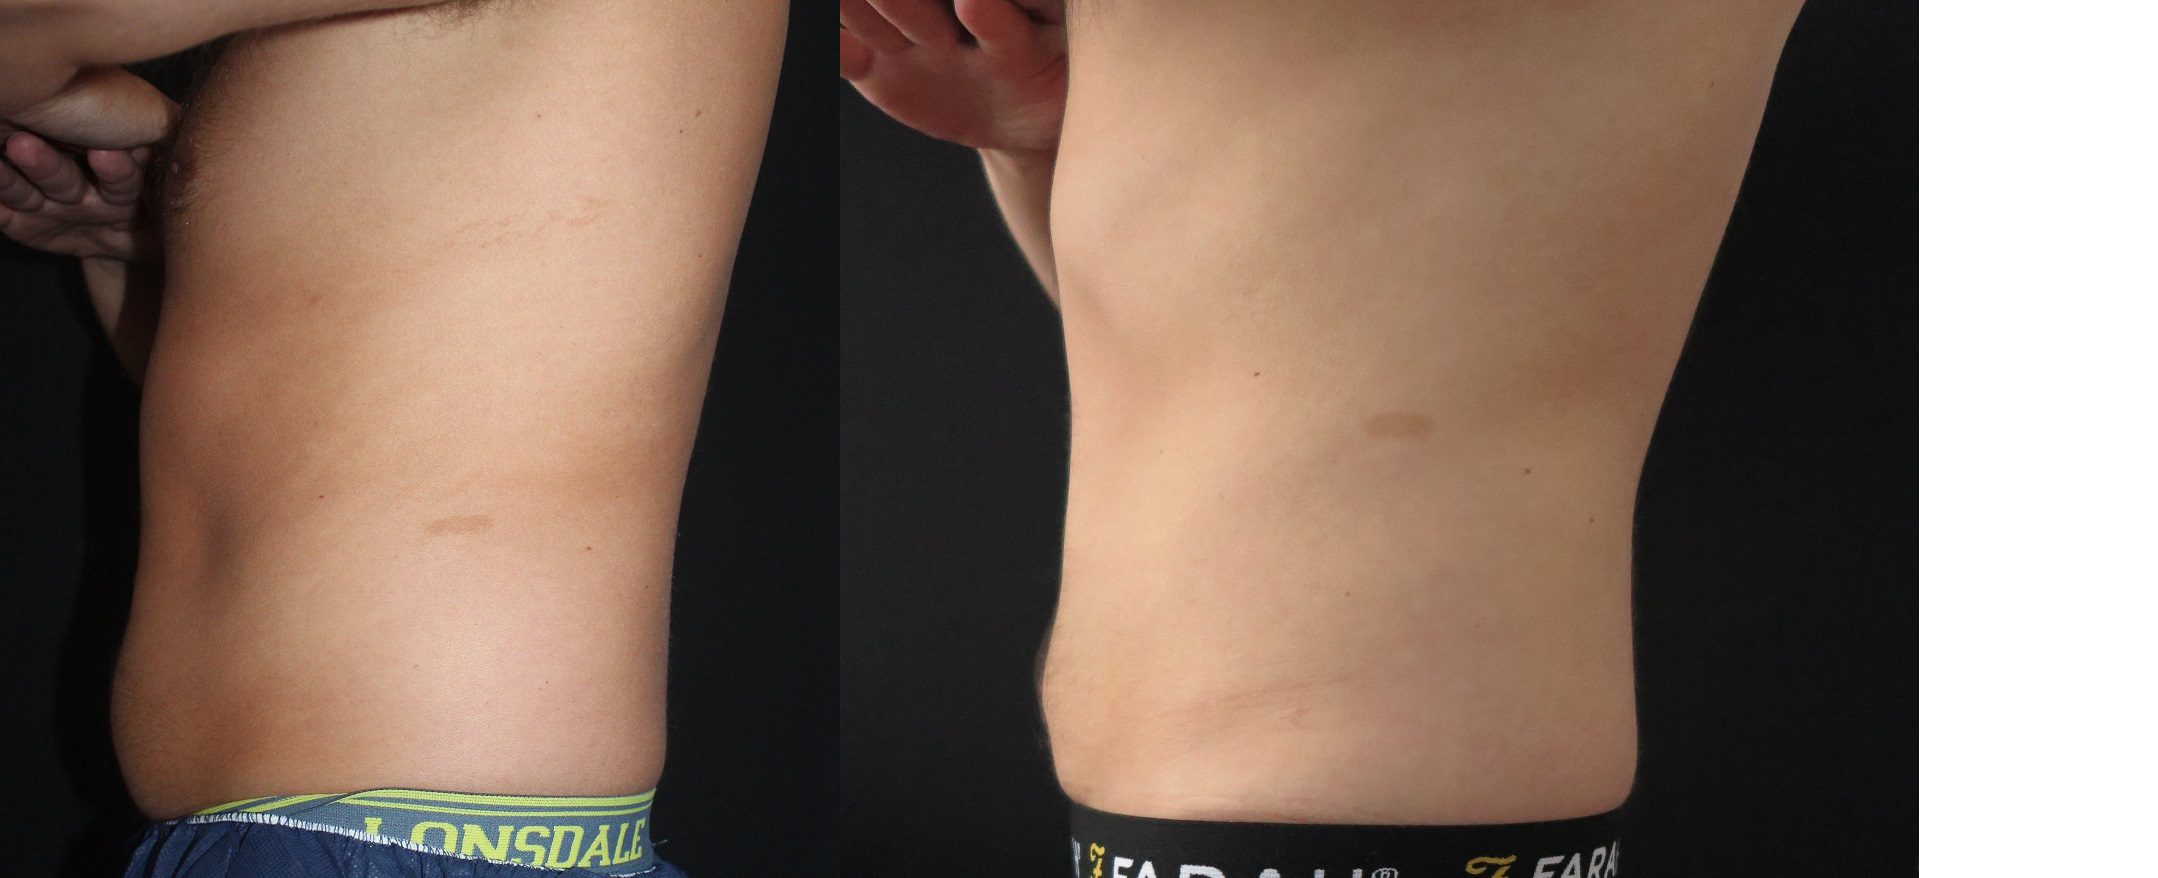 coolsculpting before and after stubborn belly fat